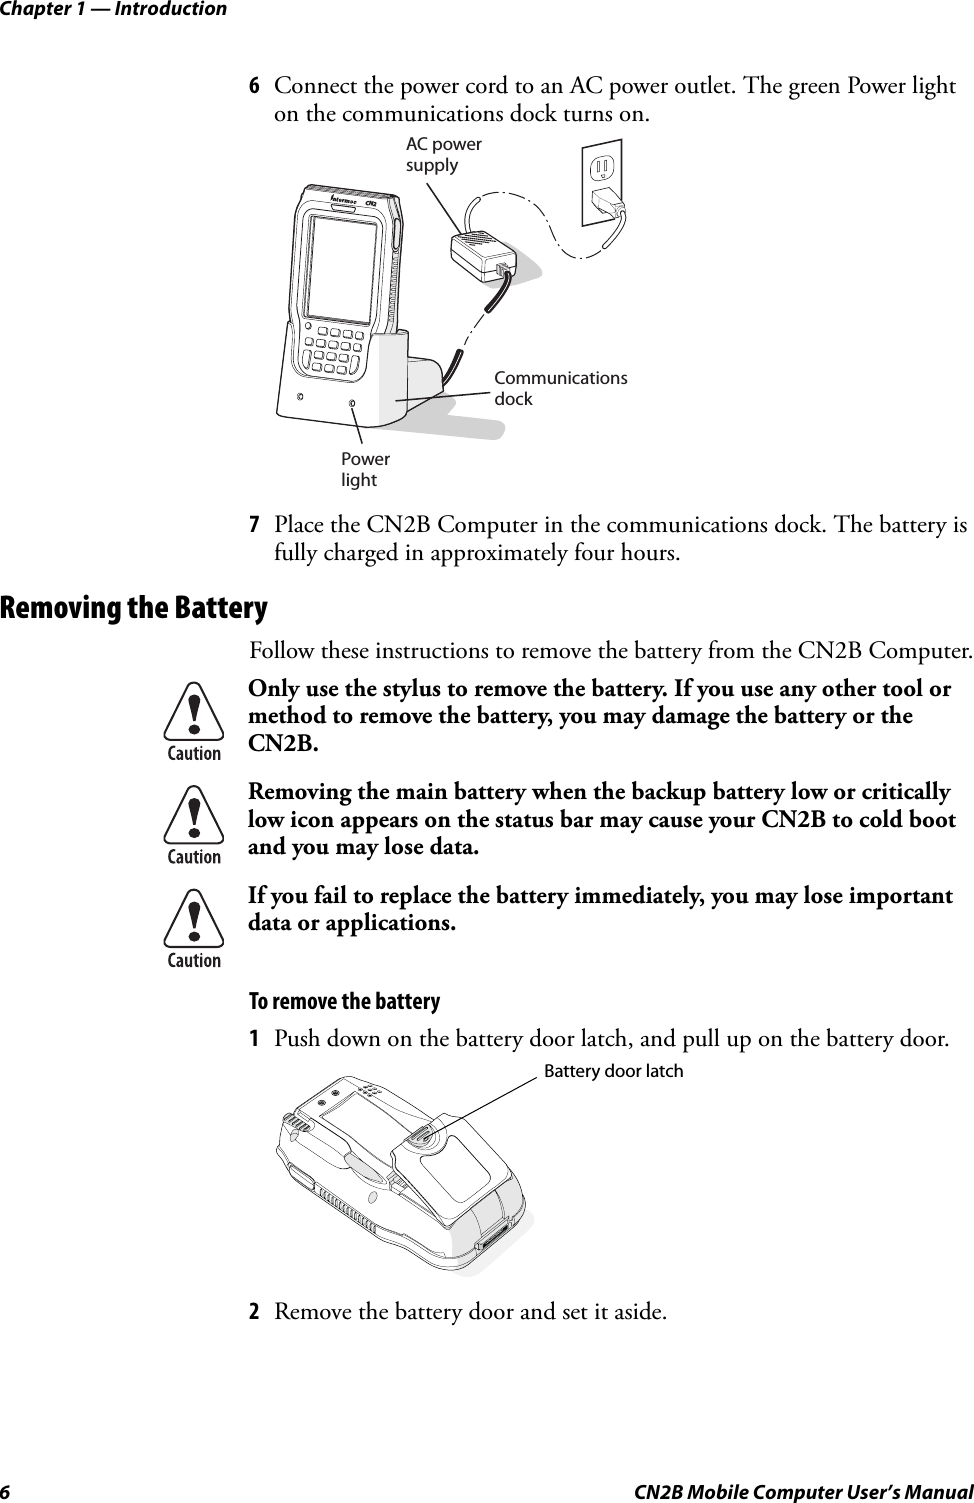 Chapter 1 — Introduction6 CN2B Mobile Computer User’s Manual6Connect the power cord to an AC power outlet. The green Power light on the communications dock turns on.7Place the CN2B Computer in the communications dock. The battery is fully charged in approximately four hours.Removing the BatteryFollow these instructions to remove the battery from the CN2B Computer.To remove the battery1Push down on the battery door latch, and pull up on the battery door.2Remove the battery door and set it aside.Only use the stylus to remove the battery. If you use any other tool or method to remove the battery, you may damage the battery or the CN2B.Removing the main battery when the backup battery low or critically low icon appears on the status bar may cause your CN2B to cold boot and you may lose data.If you fail to replace the battery immediately, you may lose important data or applications. AC power supplyCommunicationsdockPowerlightCN2Battery door latch